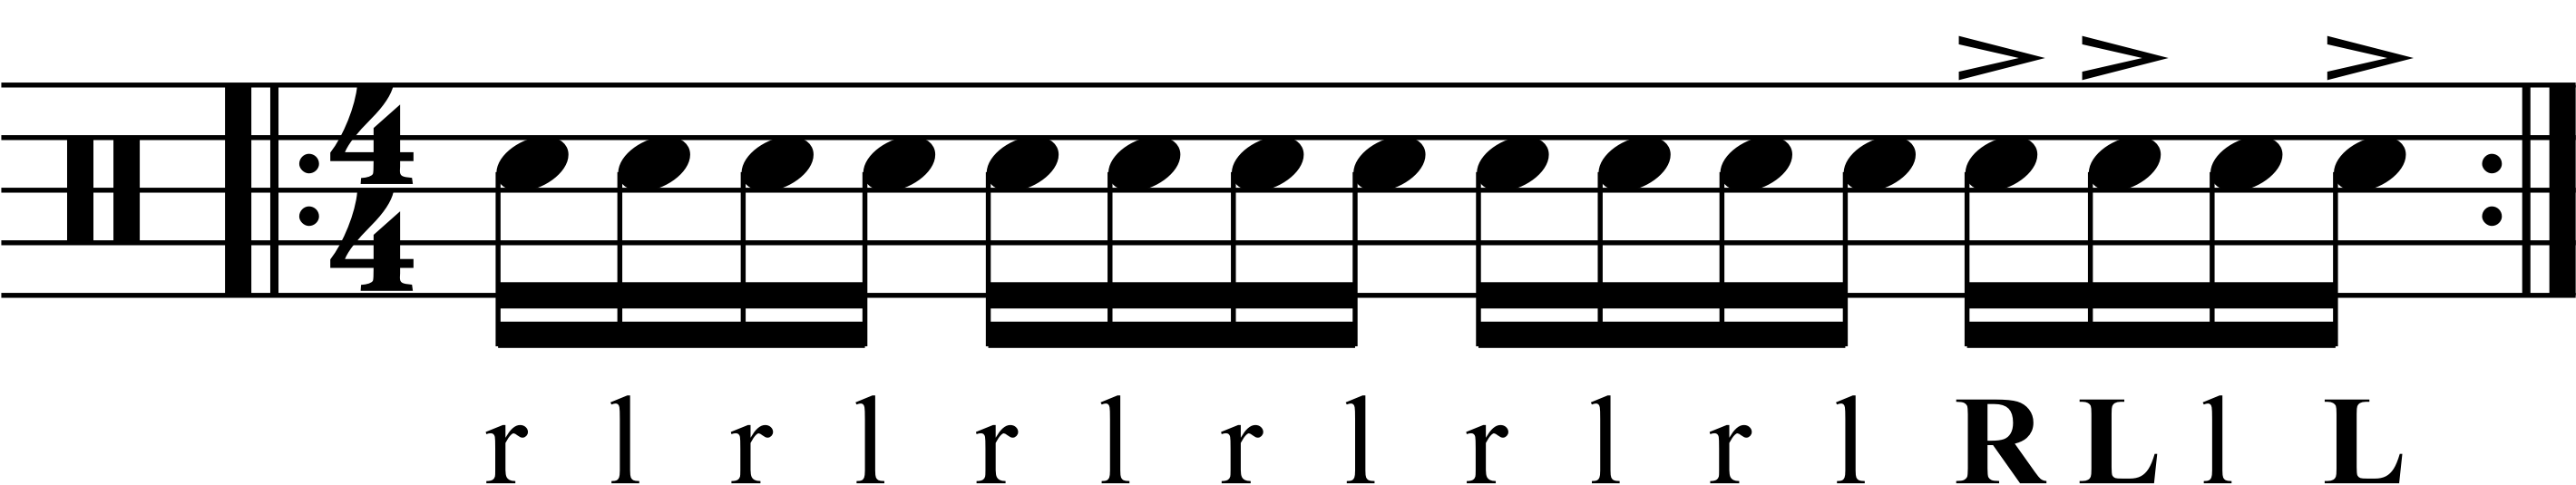 Sixteenth note grouping accent in a single stroke roll